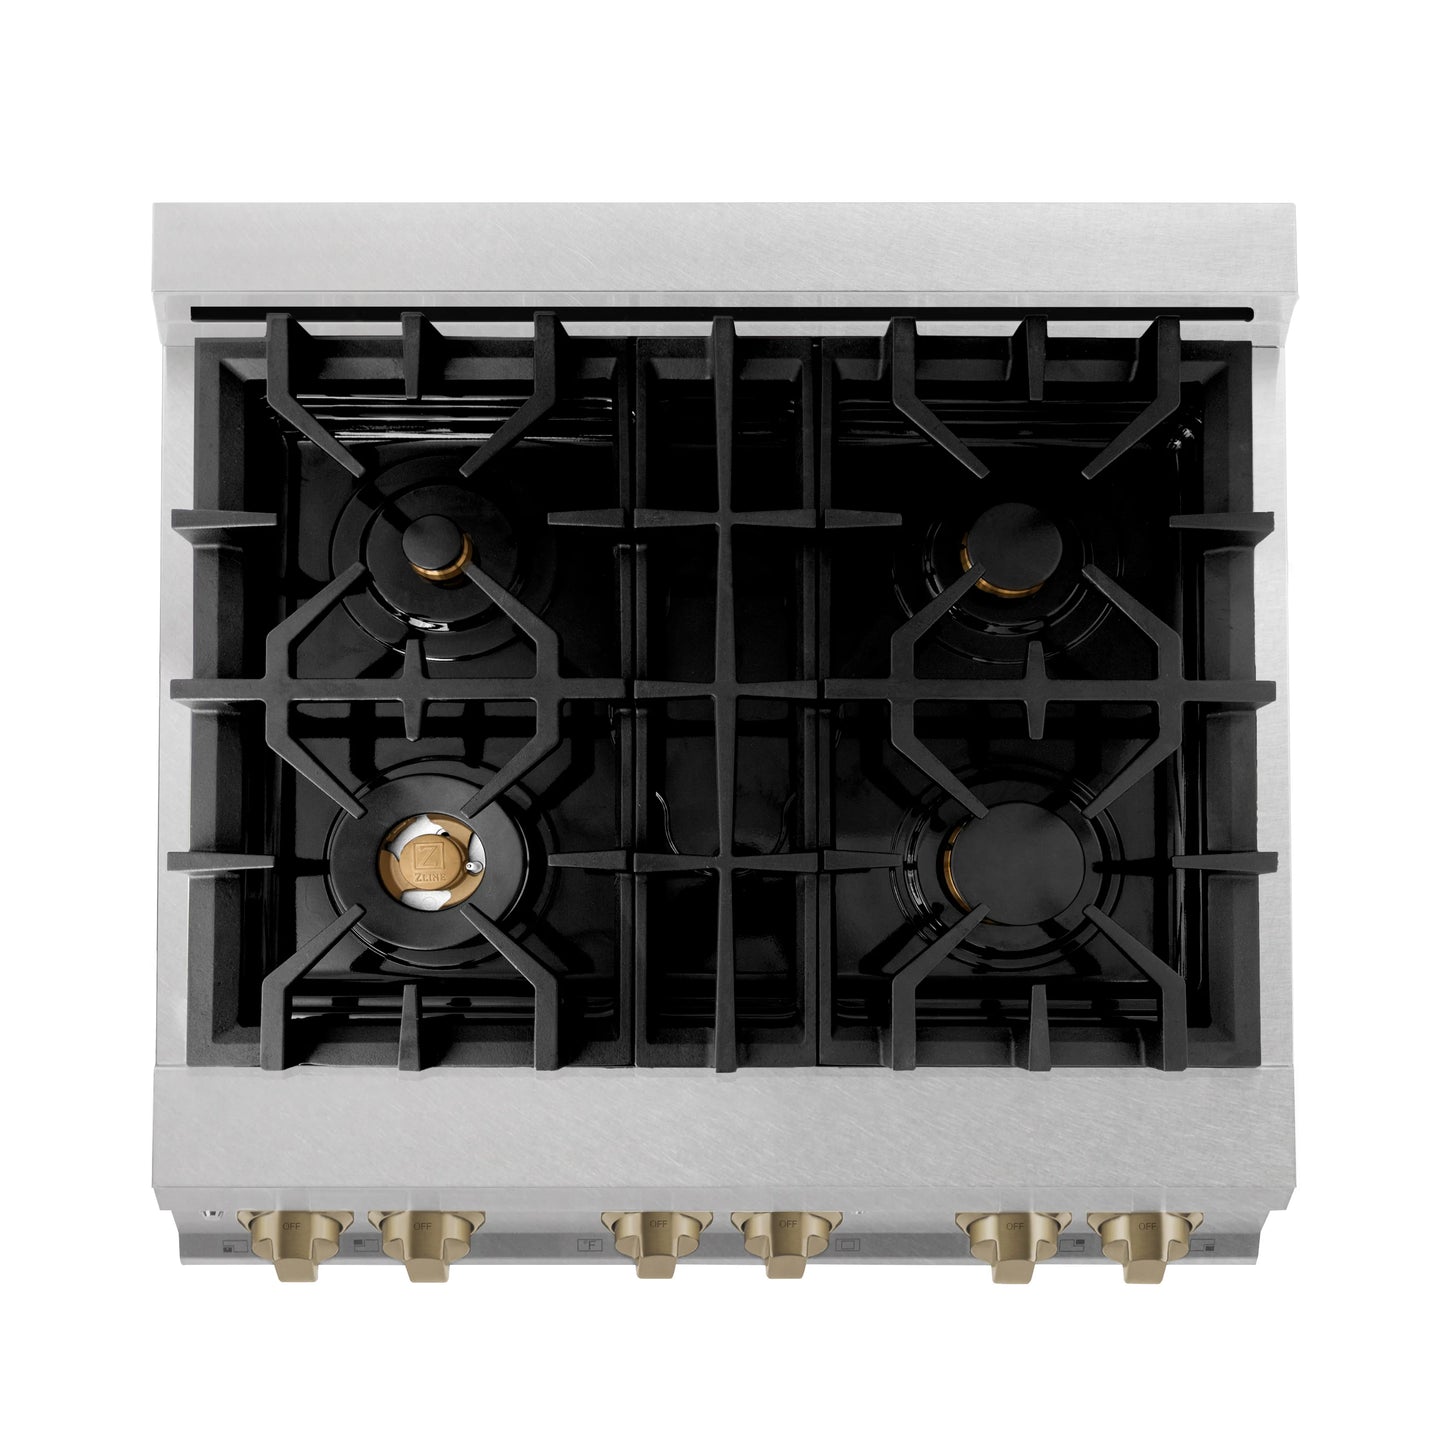 ZLINE Autograph Edition 30 in. with Gas Stove and Electric Oven in DuraSnow Steel with Bronze Accents (RASZ-SN-30-CB)